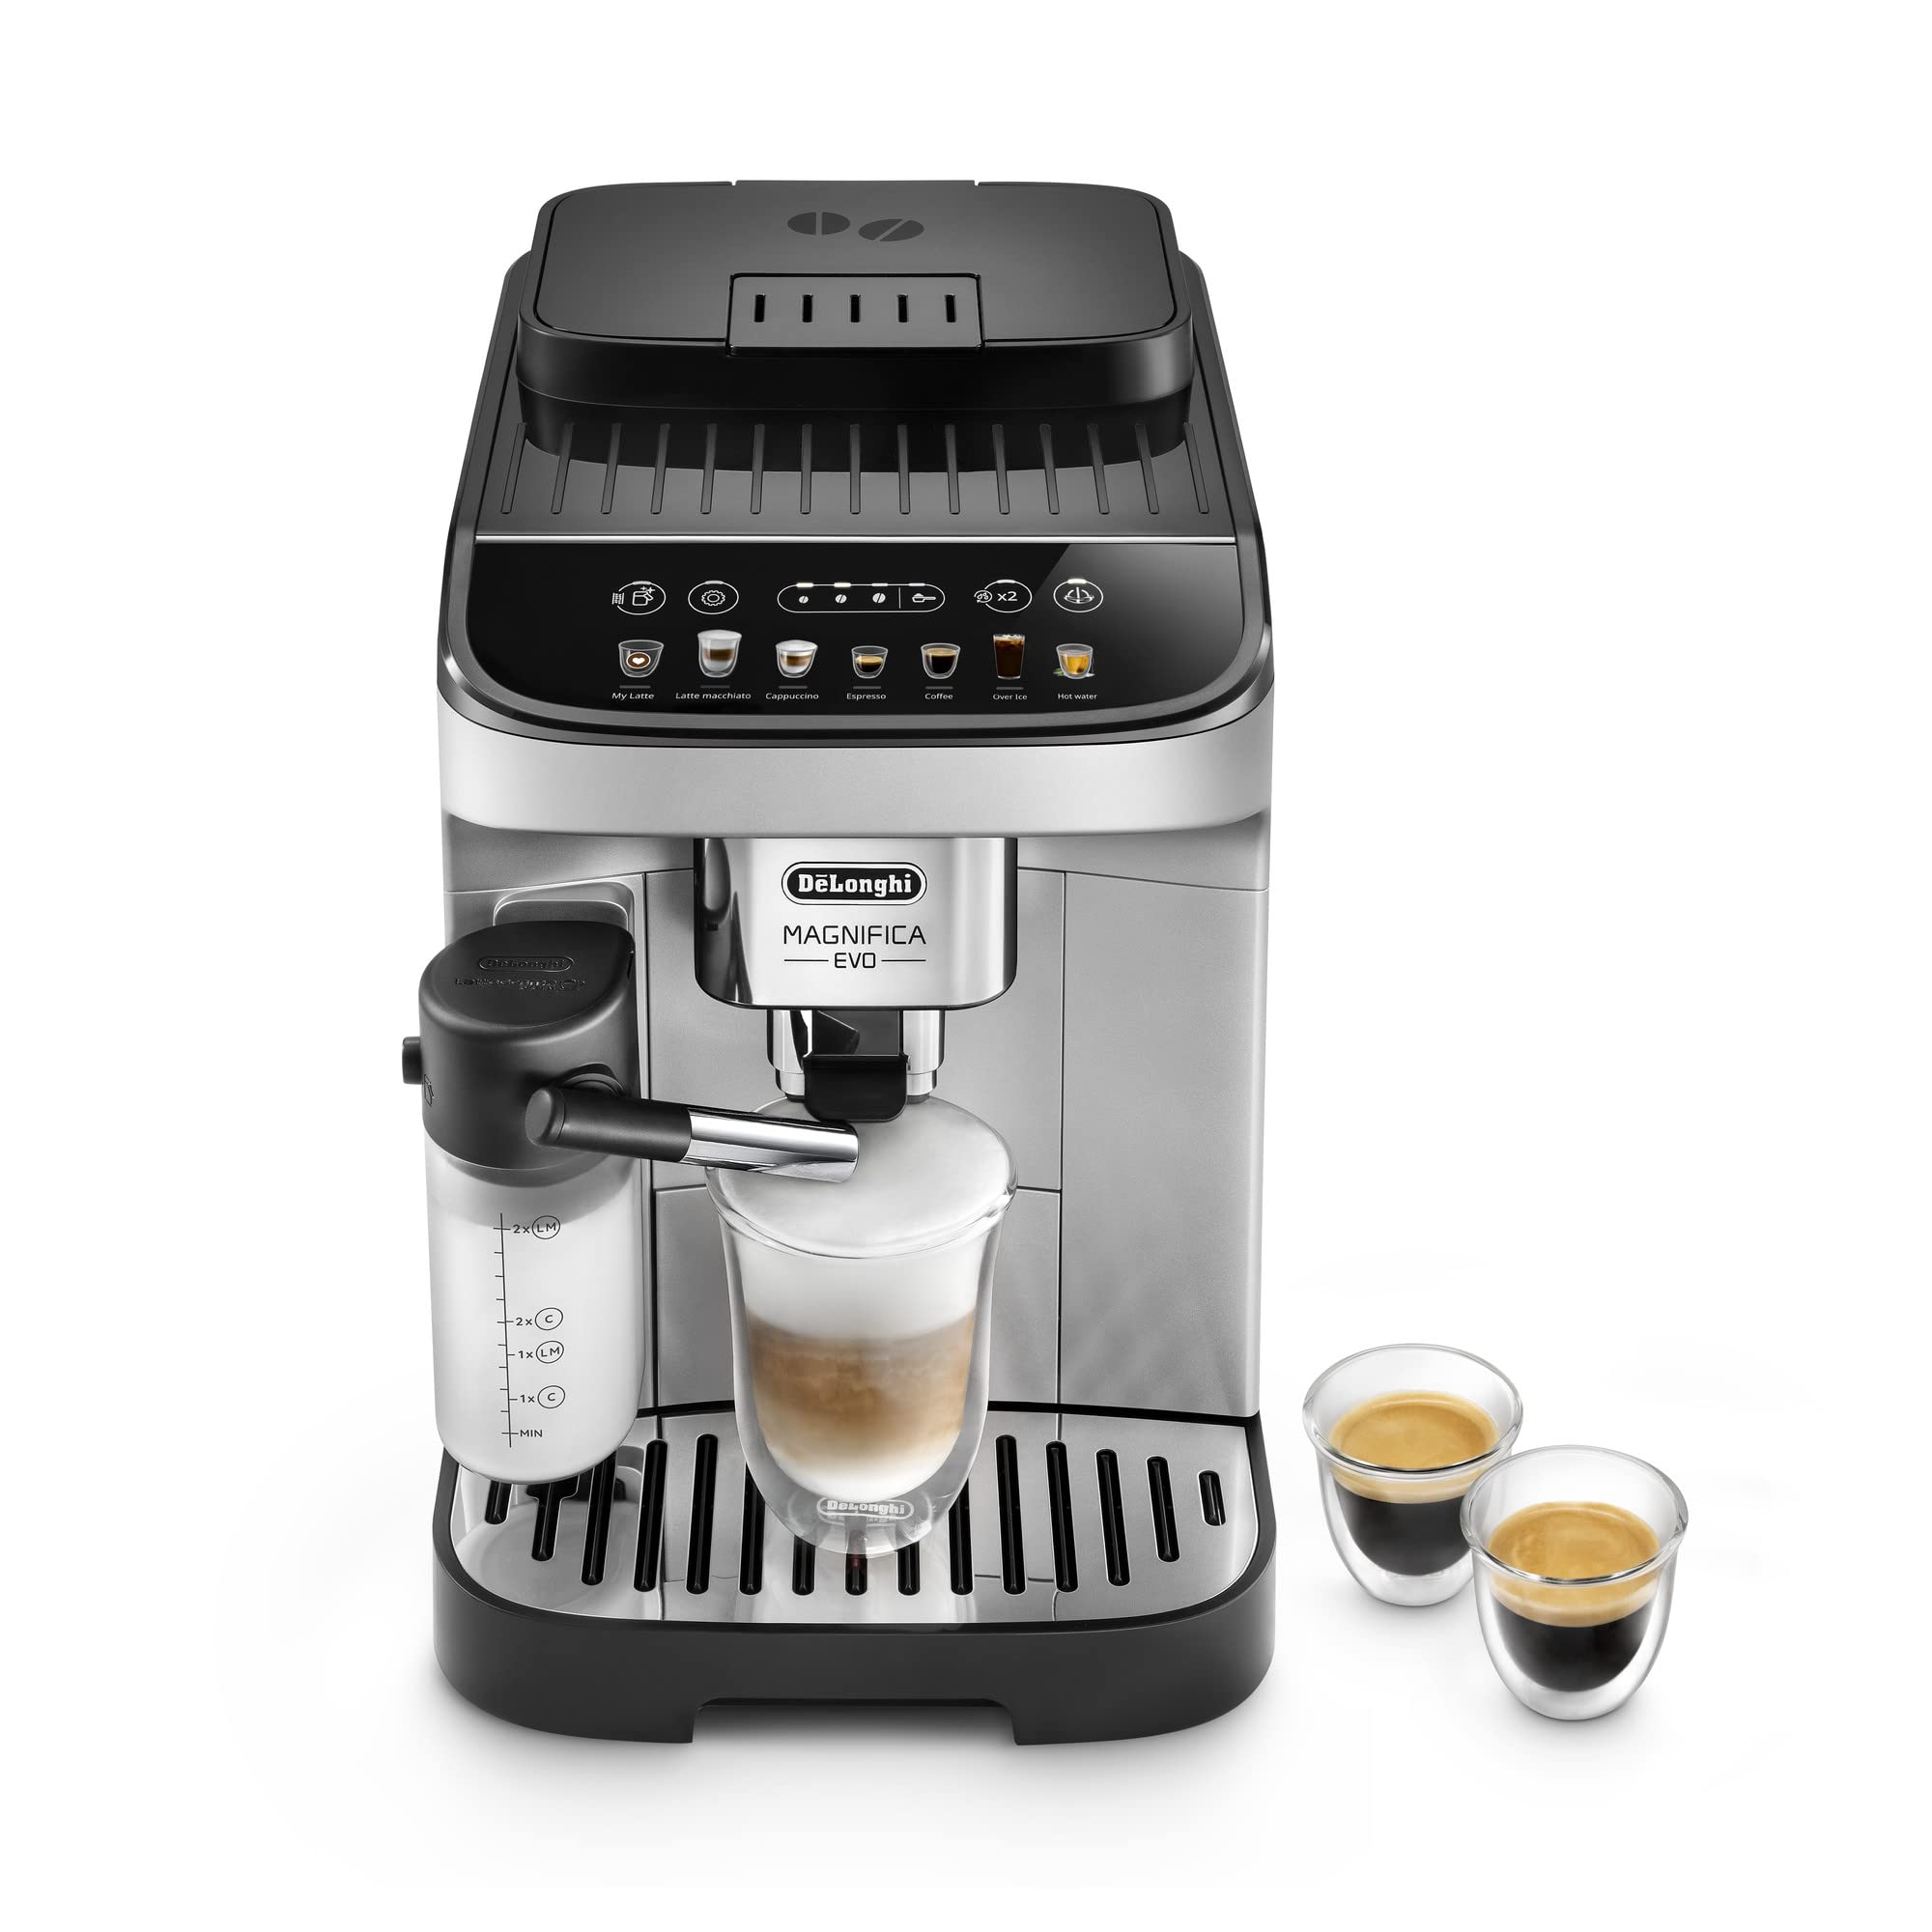 De'Longhi Magnifica Evo with LatteCrema System, Fully Automatic Machine Bean to Cup Espresso Cappuccino and Iced Coffee Maker, Colored Touch Display,Black, Silver $599